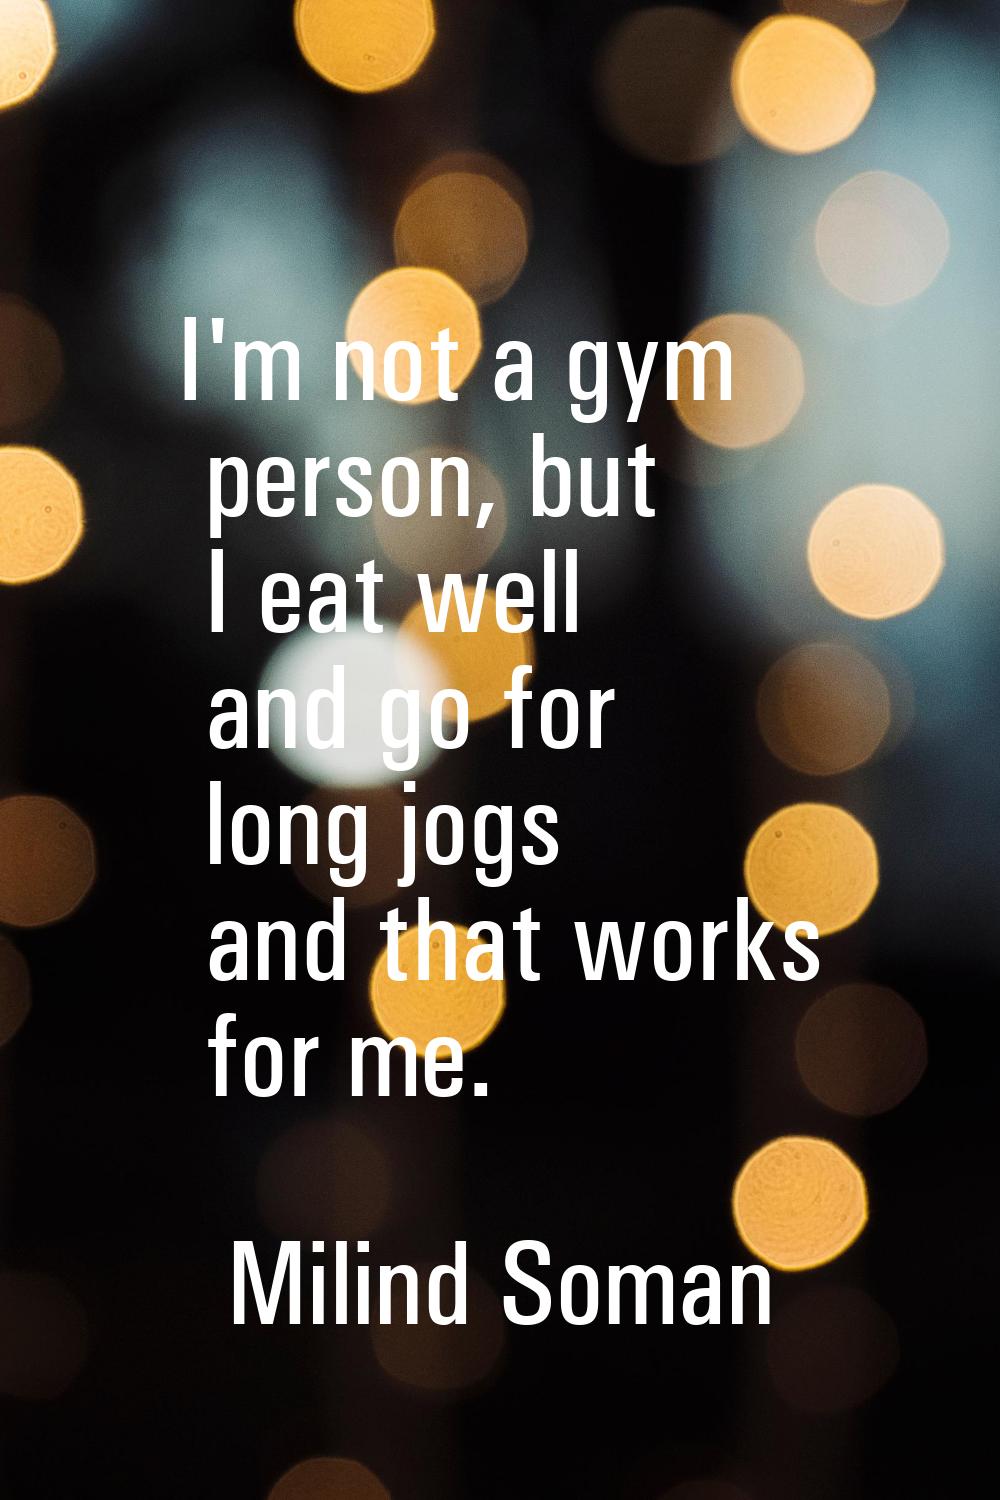 I'm not a gym person, but I eat well and go for long jogs and that works for me.